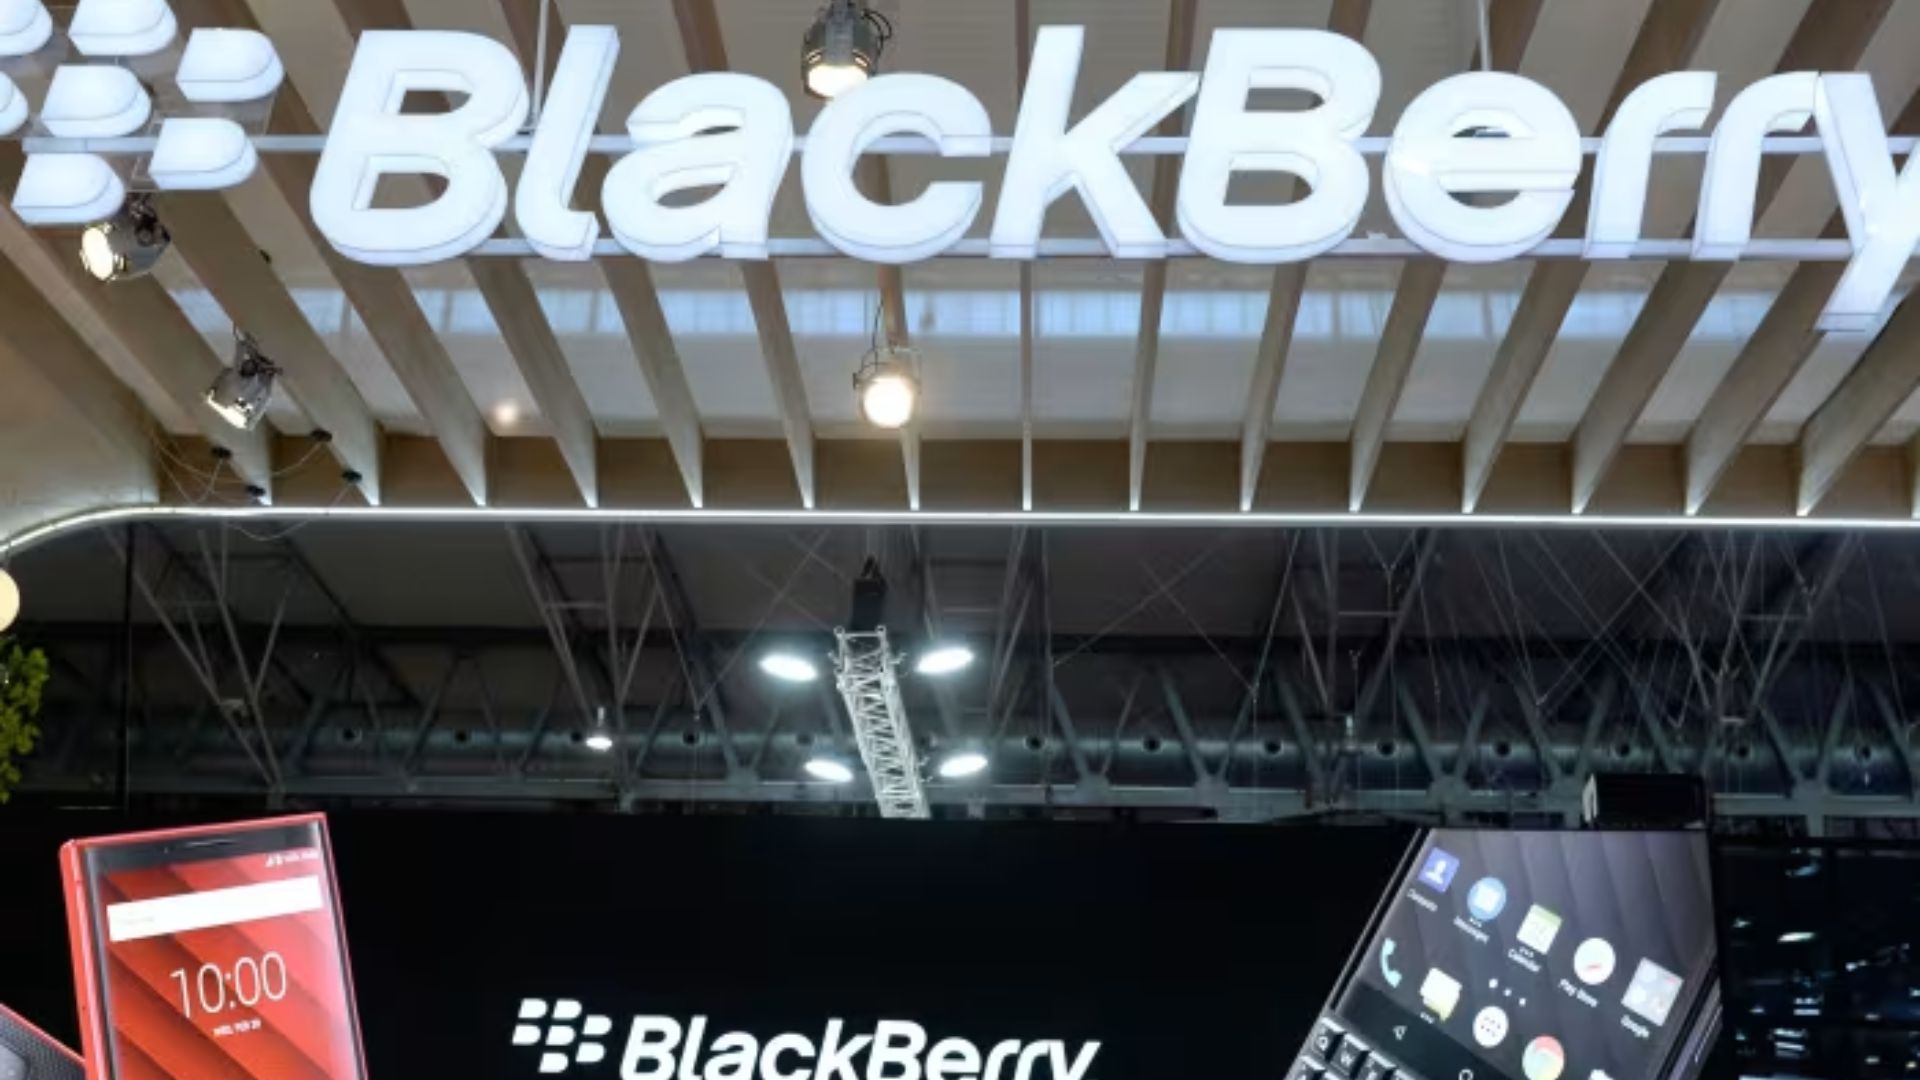 BlackBerry swings to surprise profit on sales growth for IoT, cybersecurity businesses